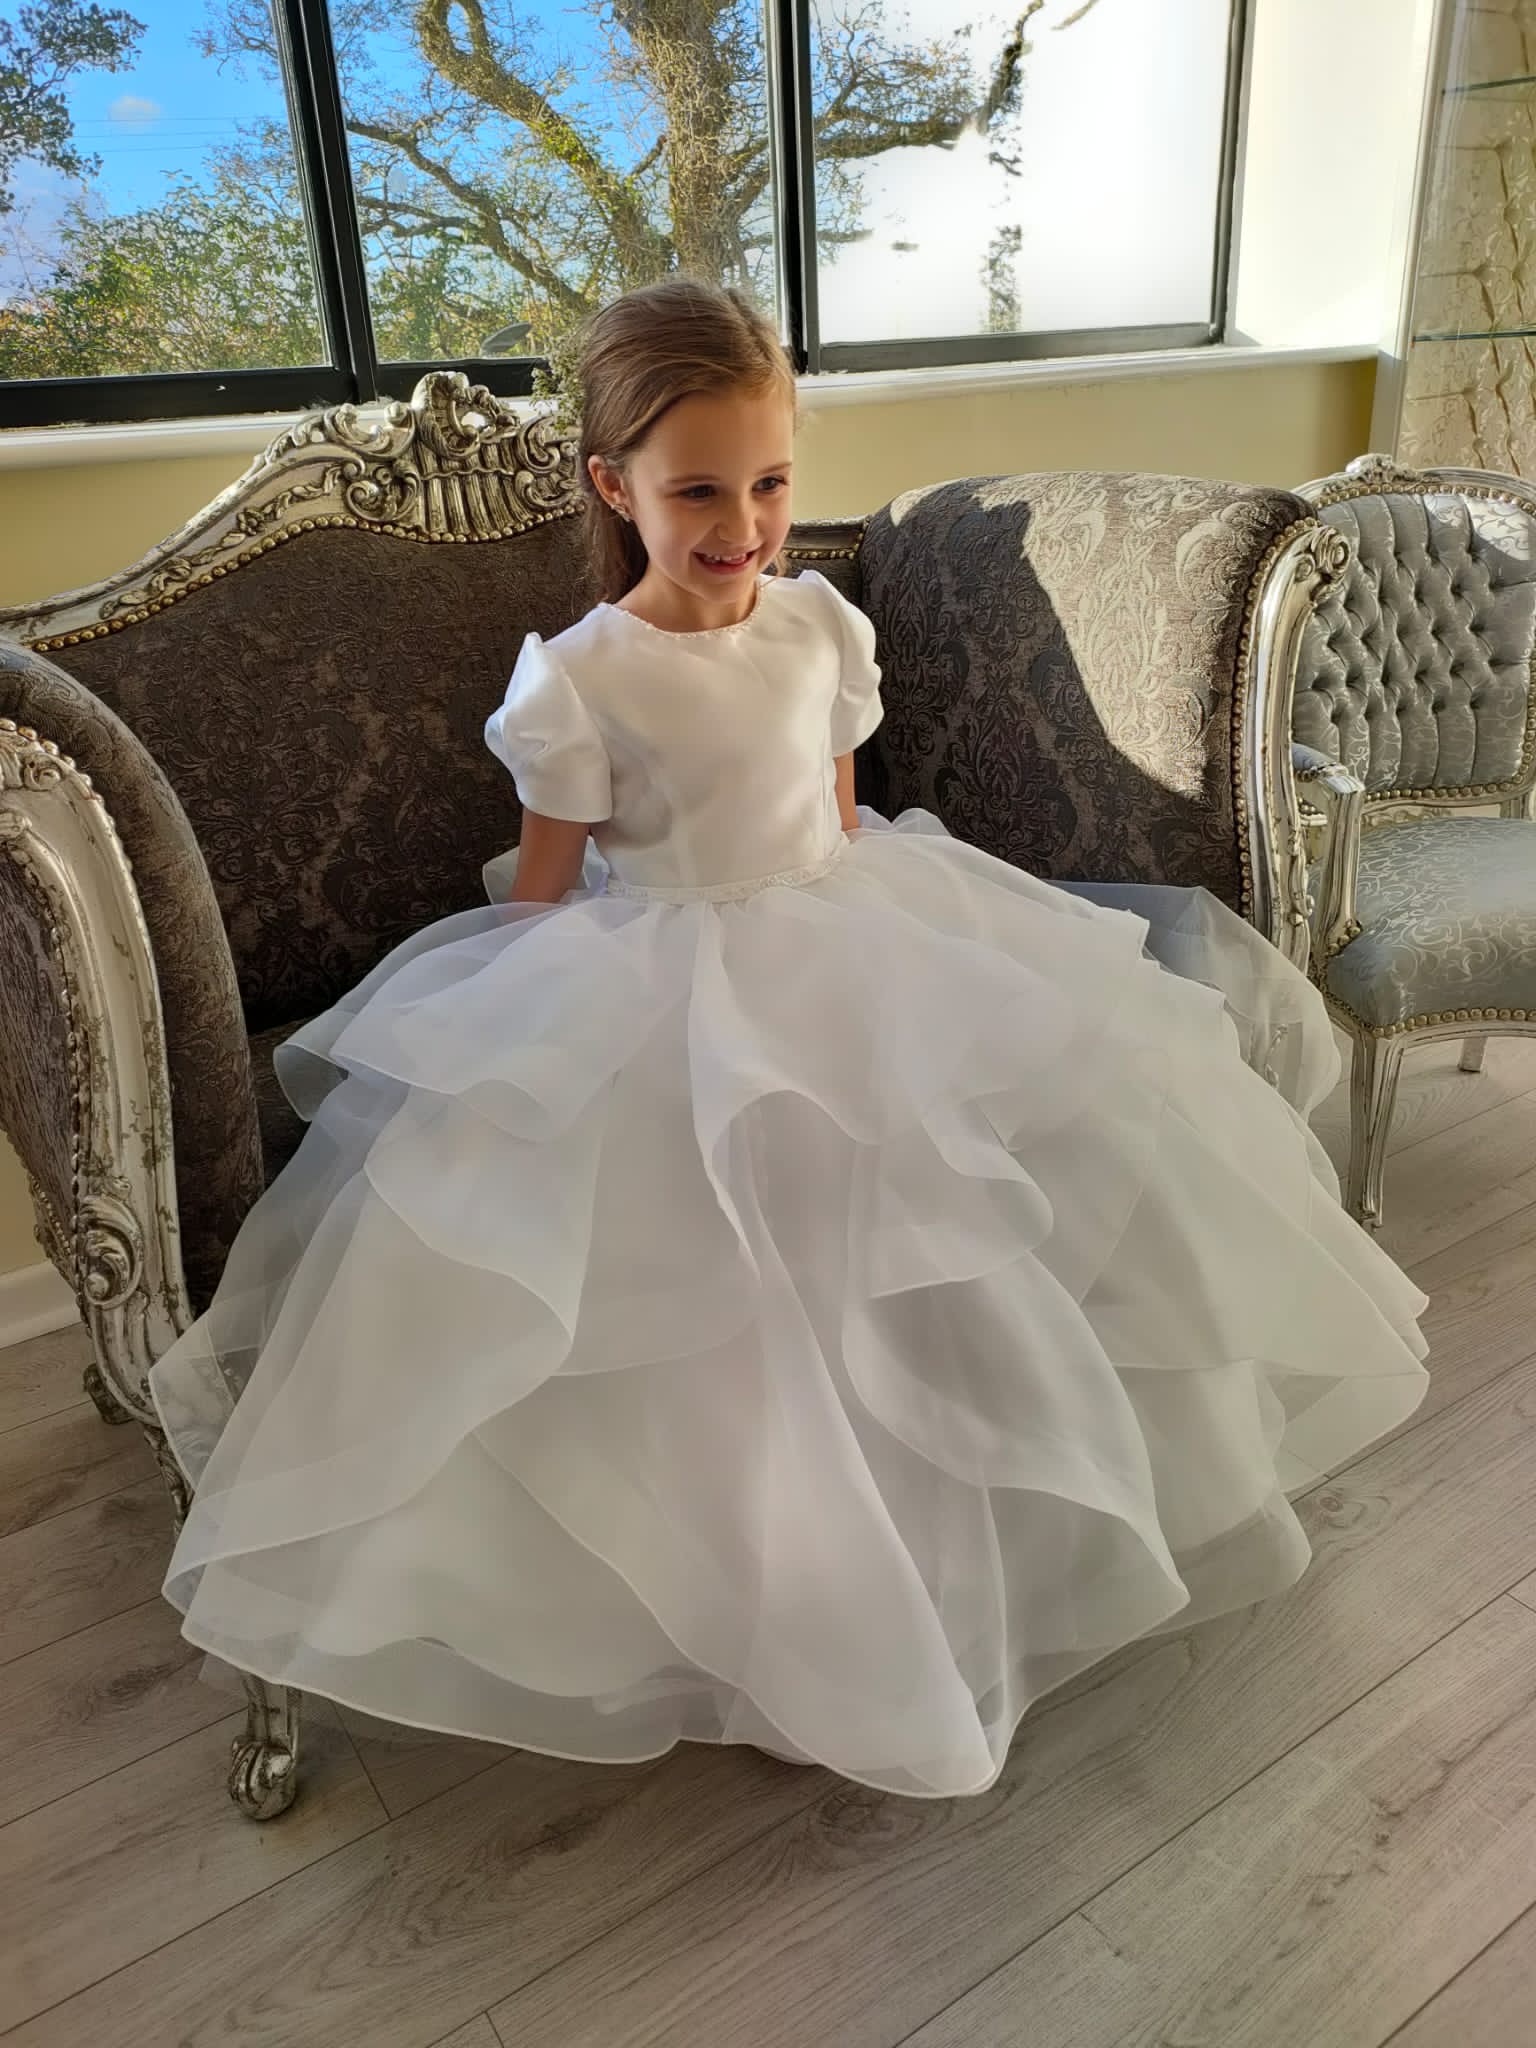 Puff sleeved mikado bodice with layered organza skirt